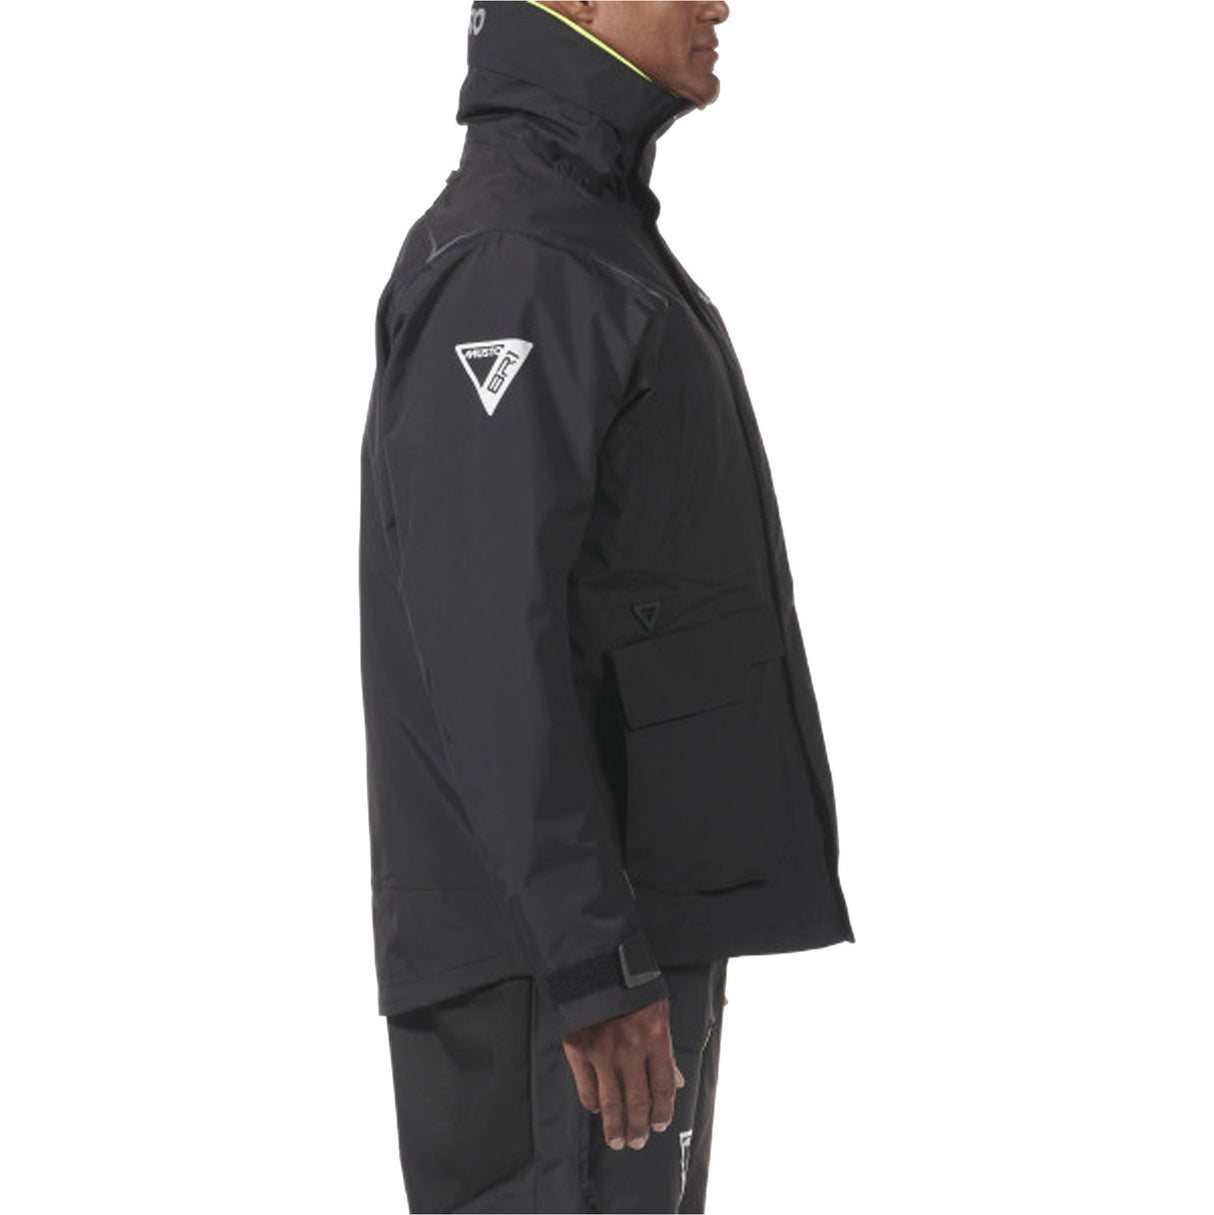 MUSTO MENS BR1 CHANNEL JACKET